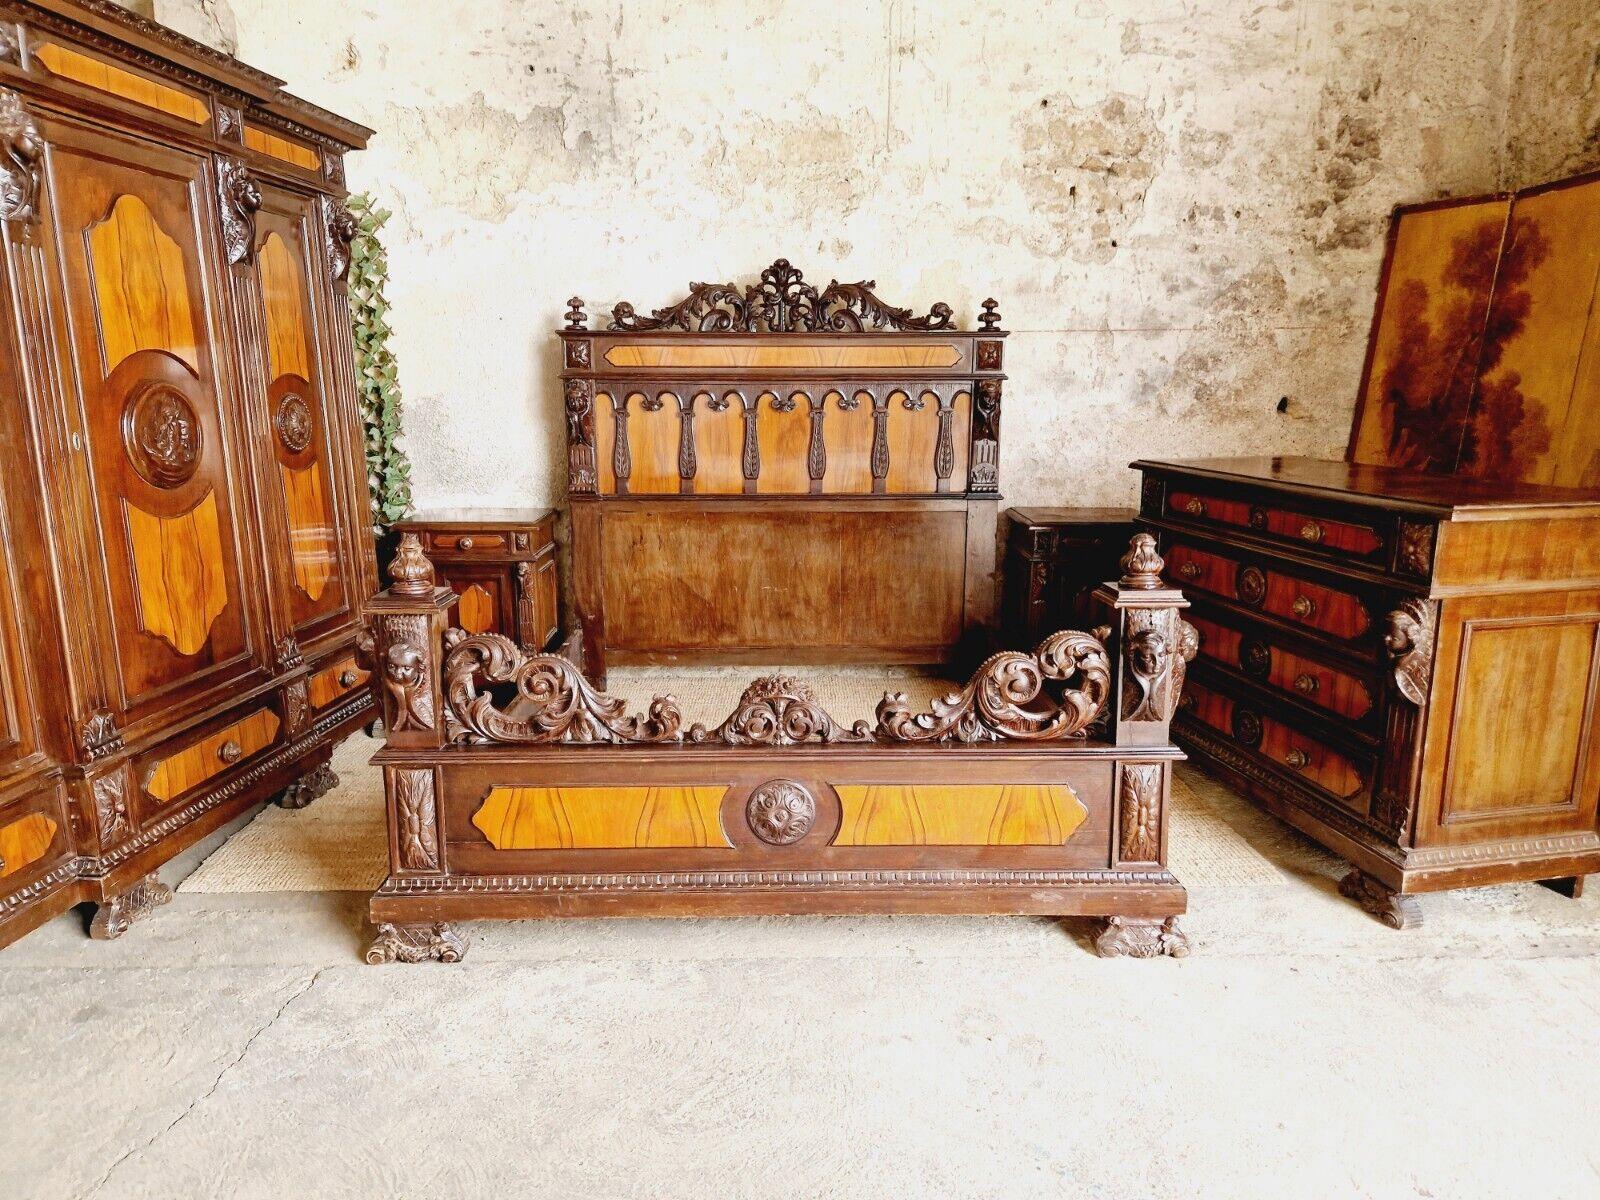 This exquisite 5-piece bedroom set features a magnificent king-size bed with an impressive Renaissance-style headboard and footboard, crafted from beautiful Mahogany wood. The bed has a fabulous carved putti cherubs to the Headboard and Footboard.